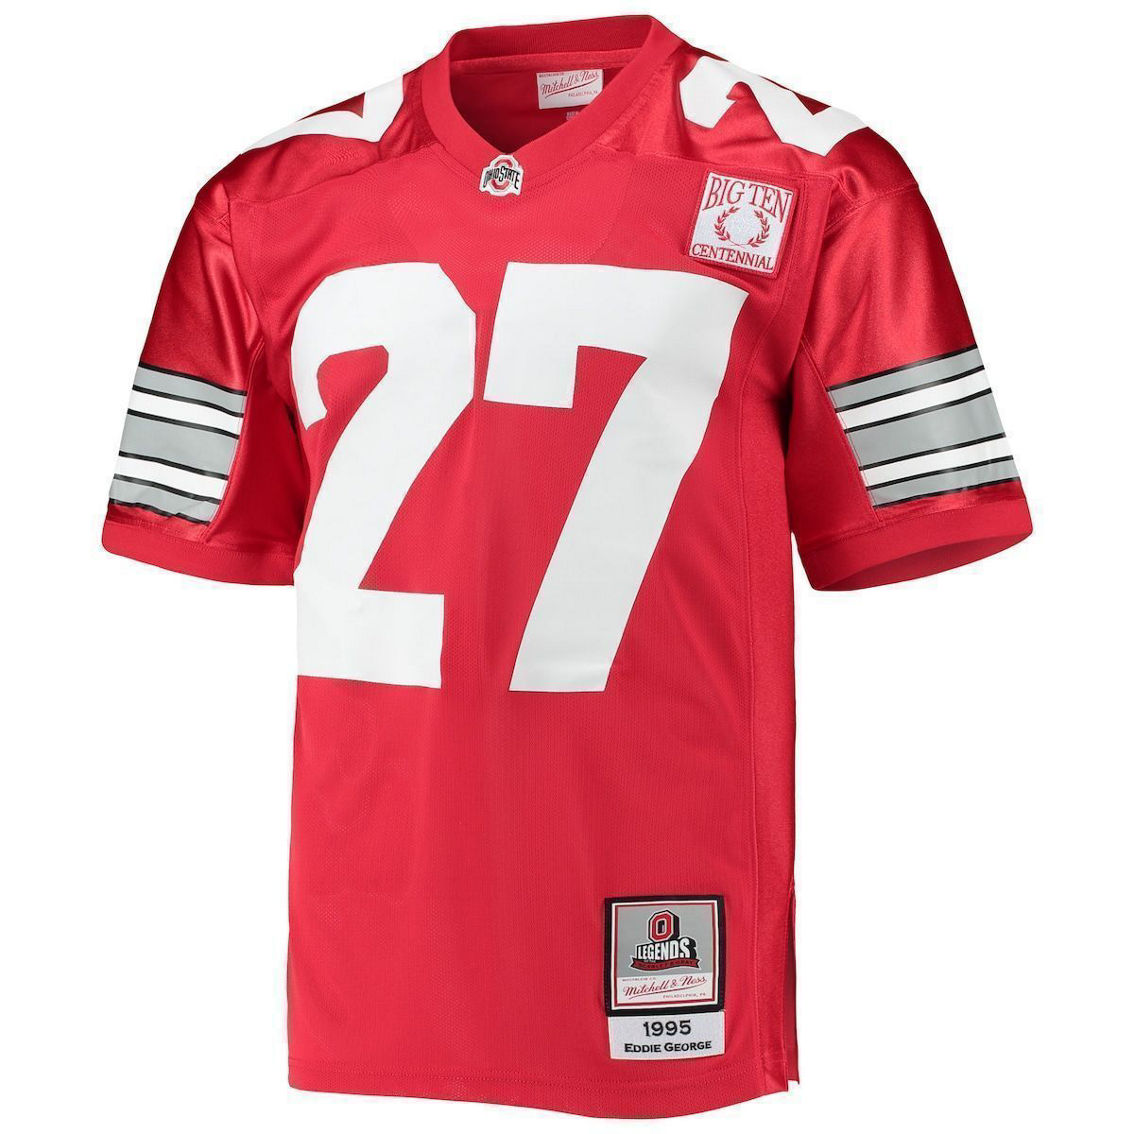 Mitchell & Ness Men's Eddie George Scarlet Ohio State Buckeyes 1995 Authentic Throwback Football Jersey - Image 3 of 4